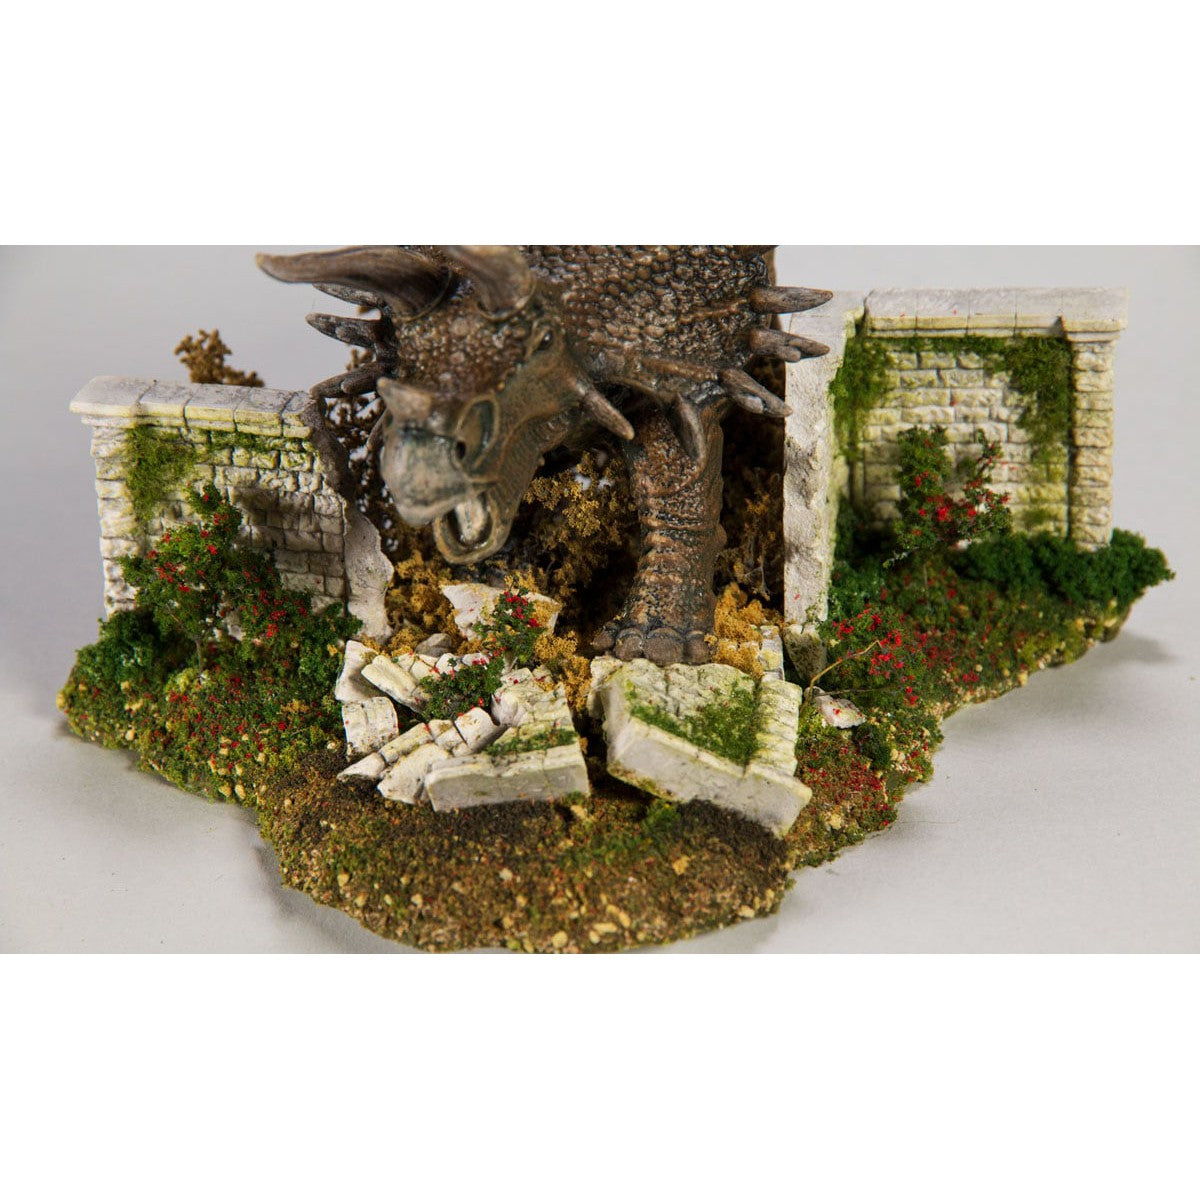 Dry Weeds - Dry Weeds are pre-blended and easy to apply on your miniature base or gaming board